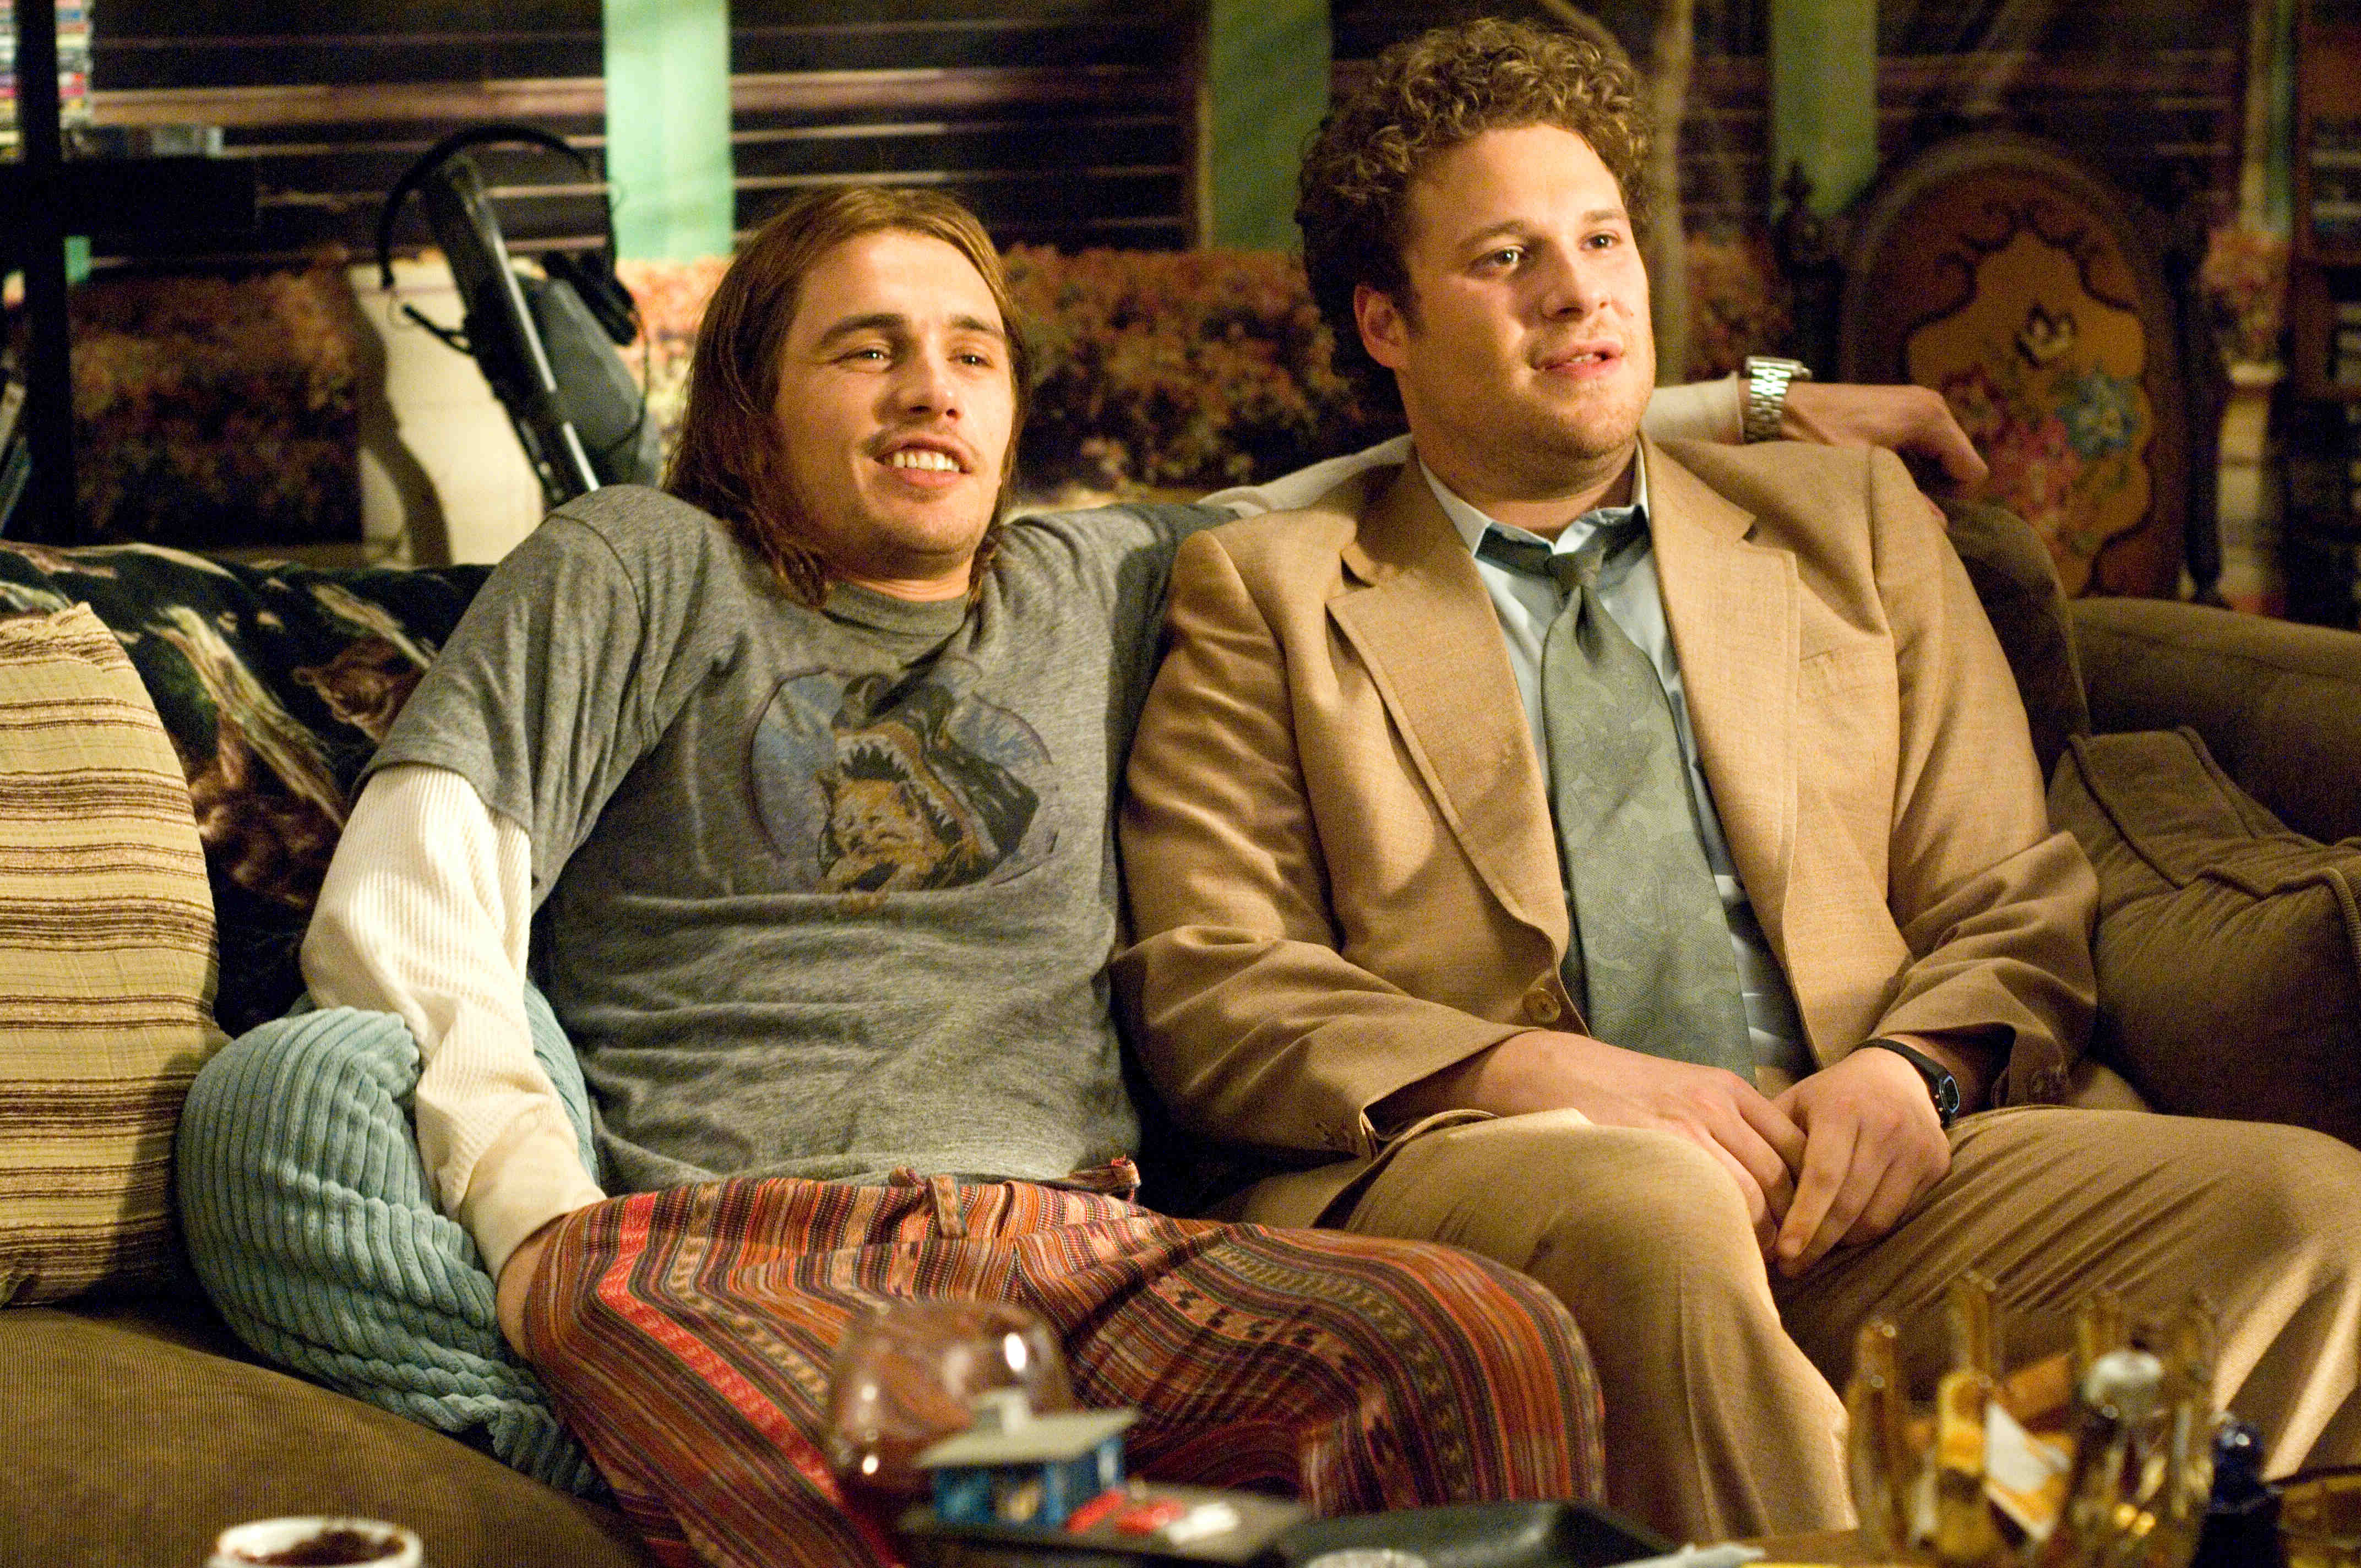 James Franco stars as Saul Silver and Seth Rogen stars as Dale Denton in Columbia Pictures' Pineapple Express (2008)